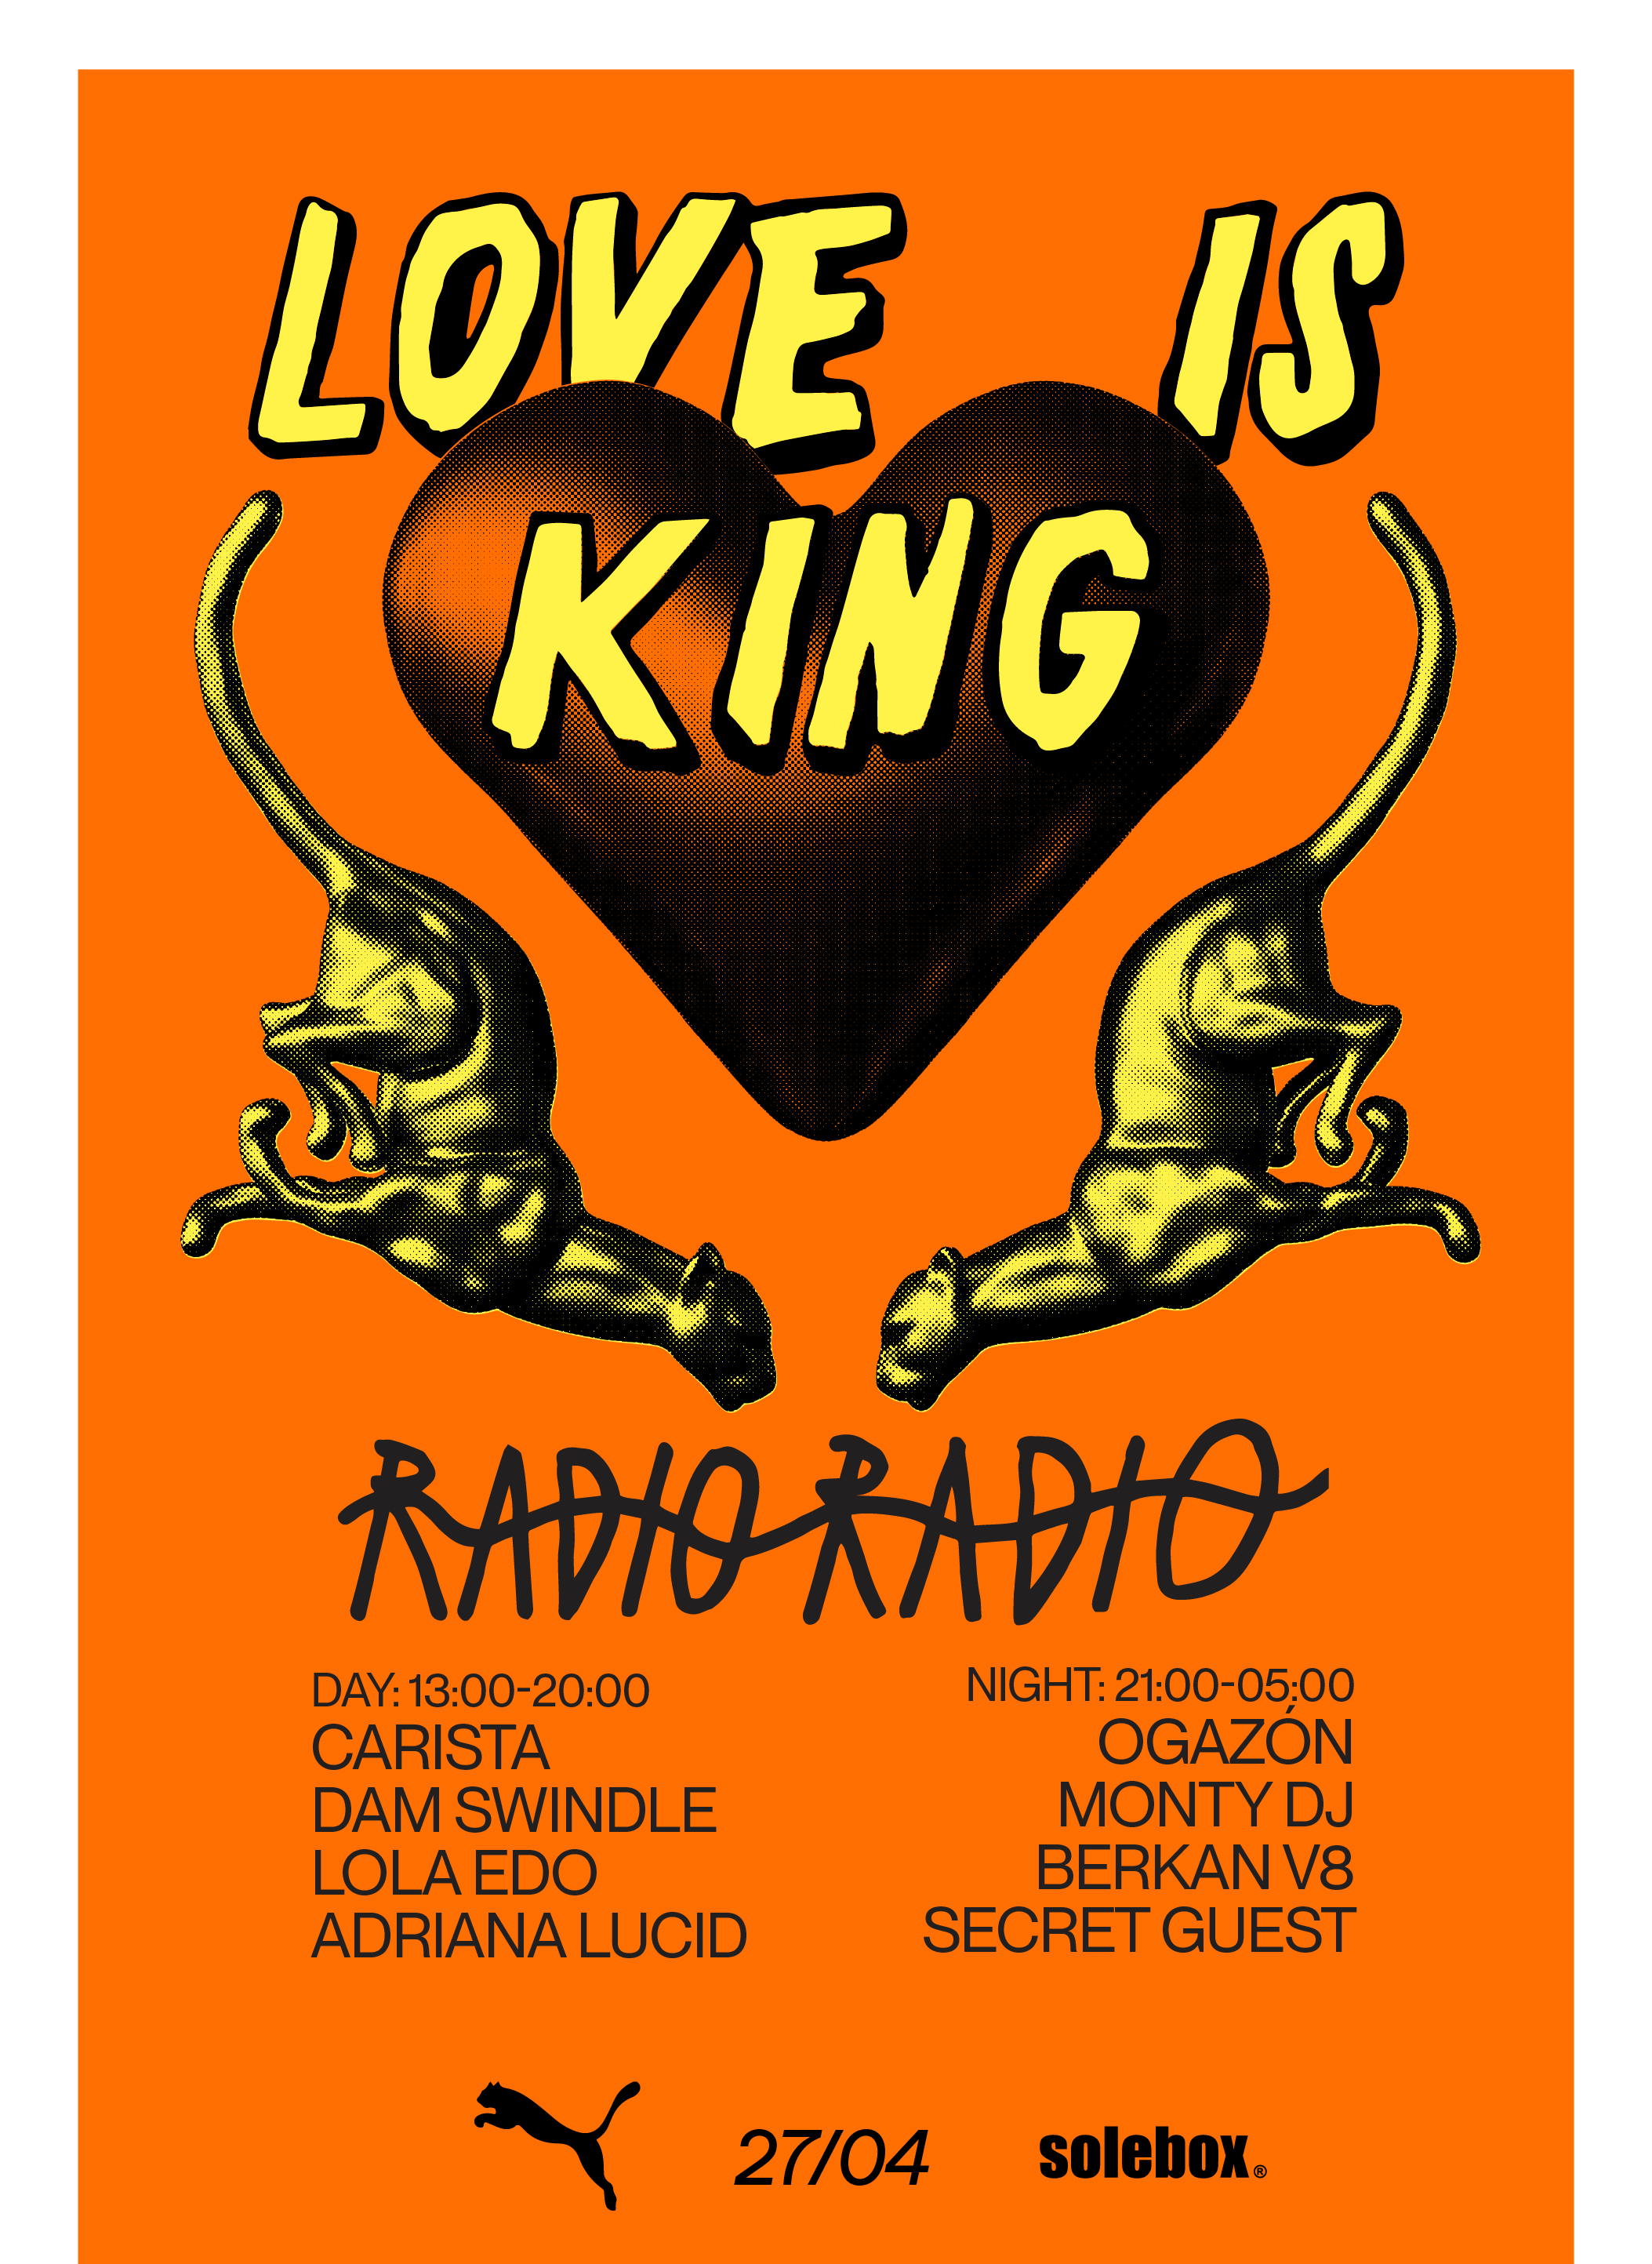 LOVE IS KING - FREE BLOCK PARTY - フライヤー表